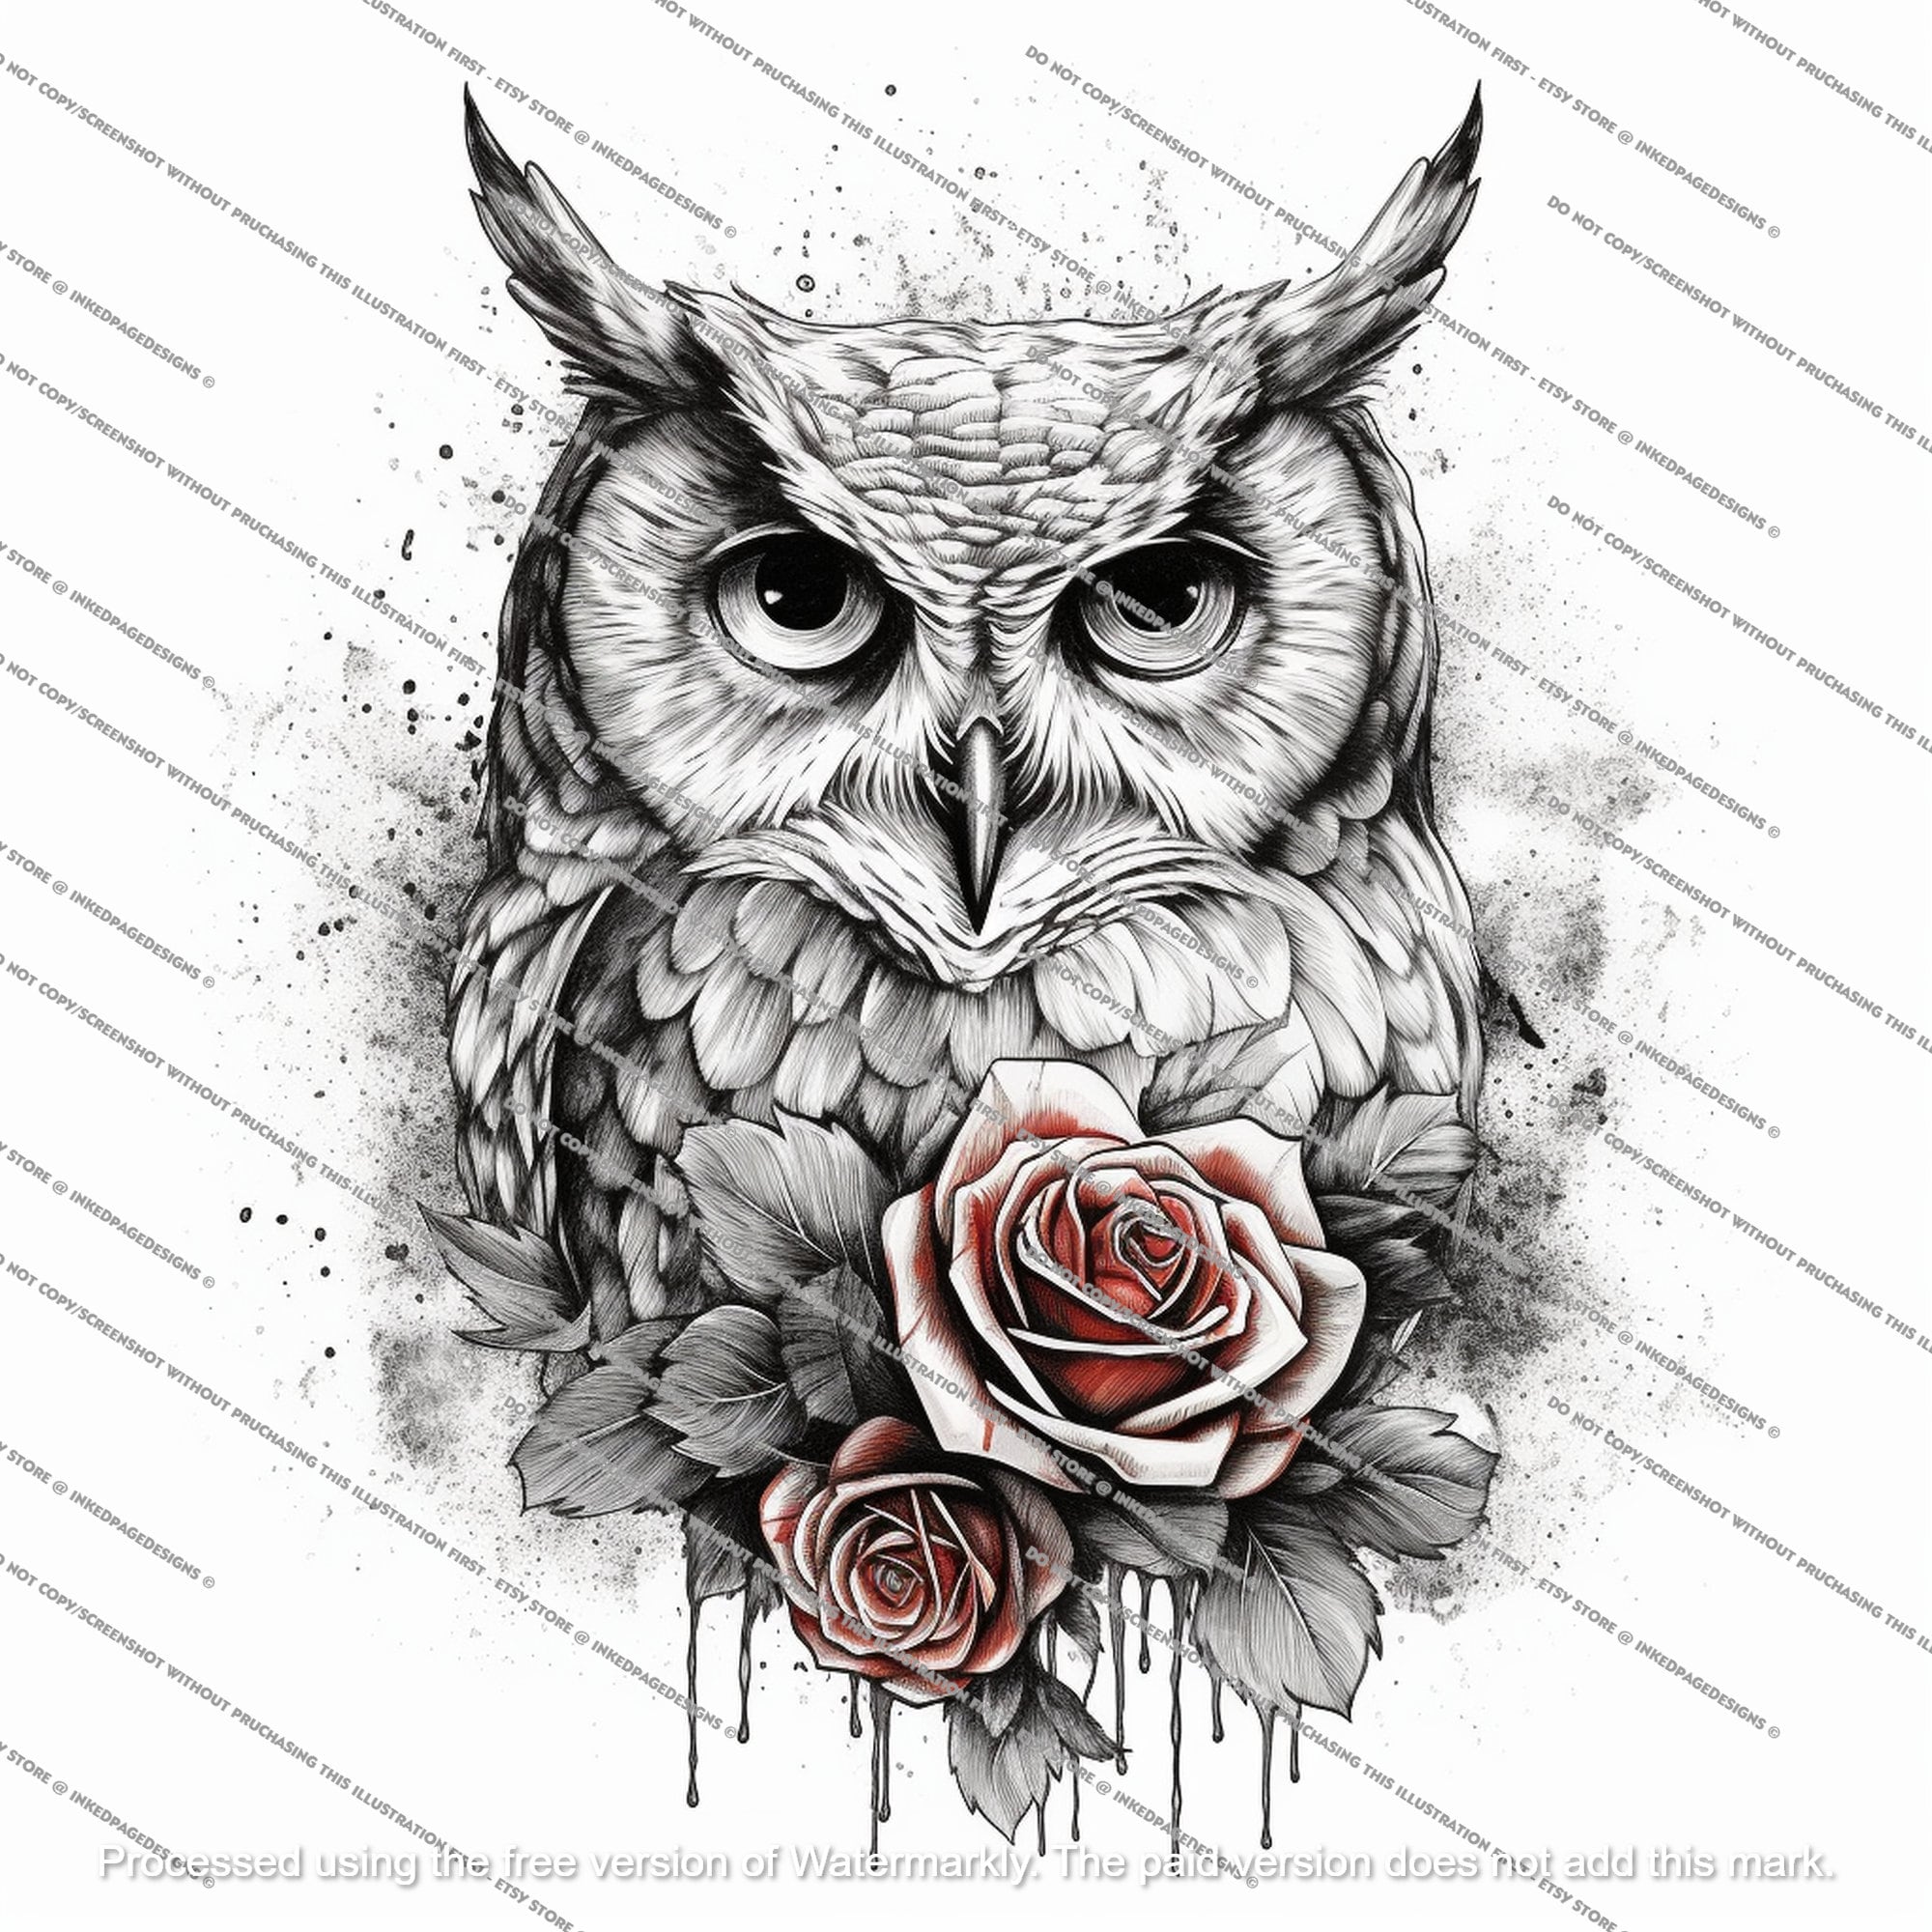 nazarepinela on Twitter Owl Tattoo Meaning Symbolism Design amp  Placement Owl tattoos are a favorite choice for both men and women when  choosing one of the animal tattoos However the owl tattoo